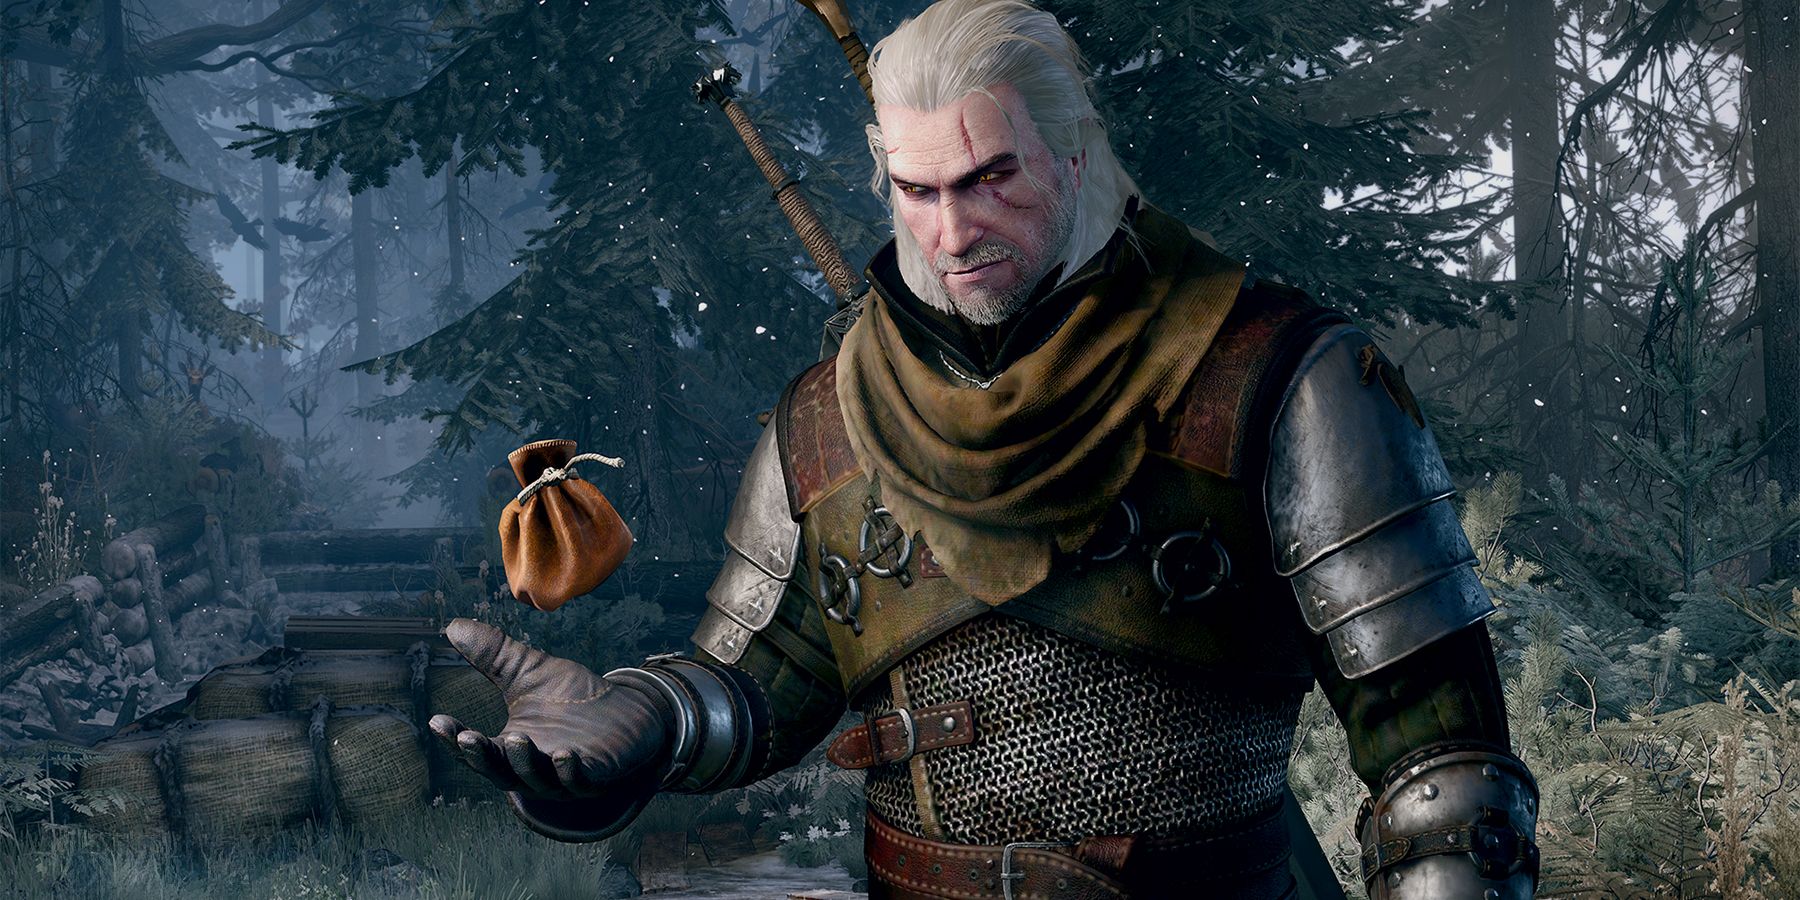 Geralt from The Witcher tossing a coin purse